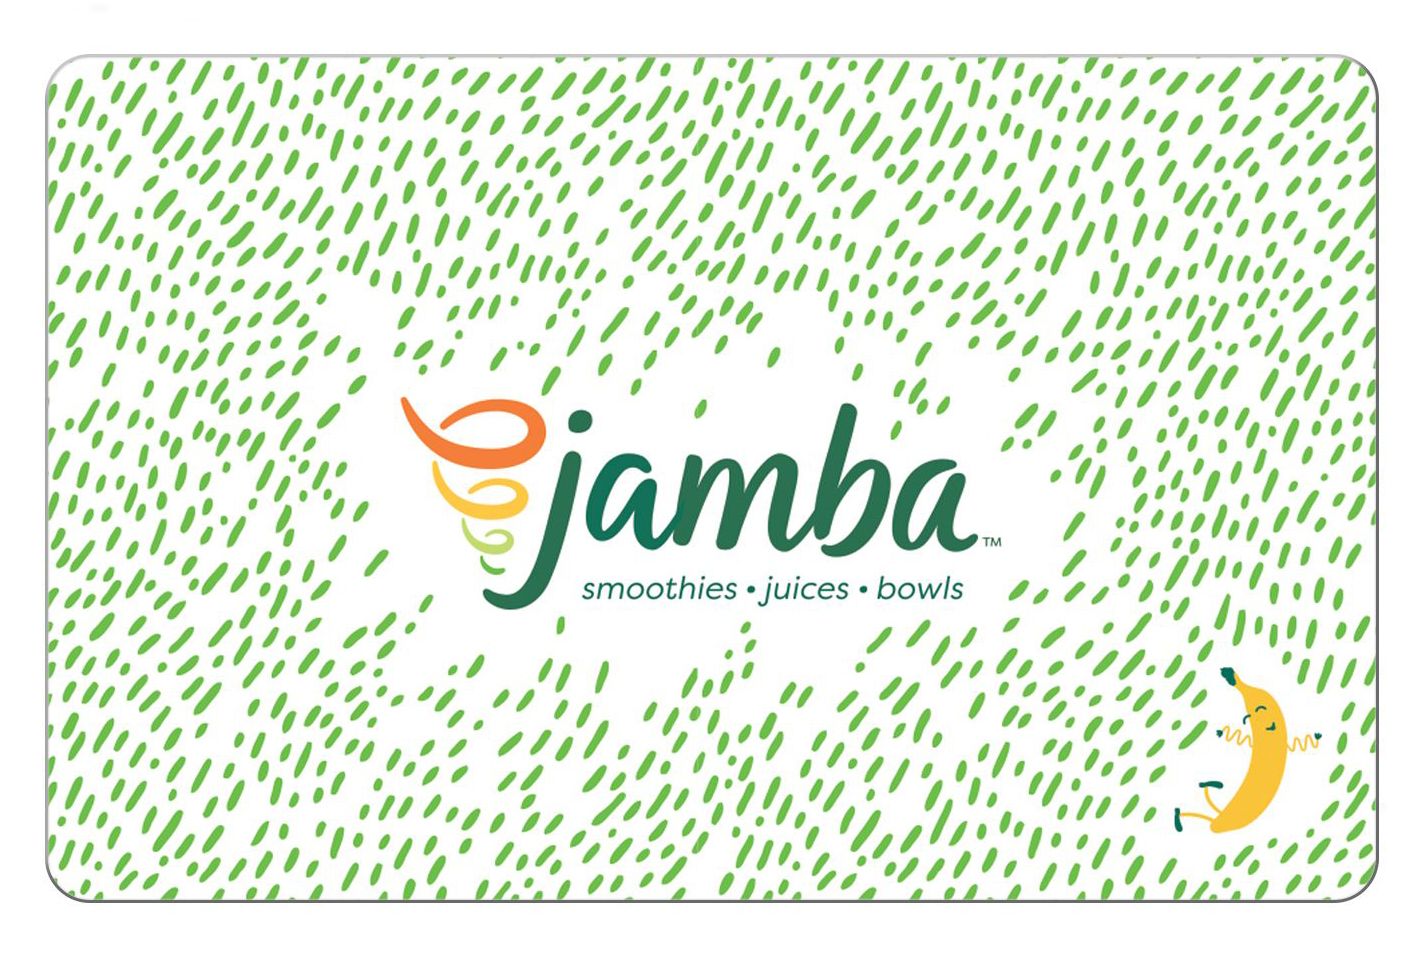 Spend $30 on E-Gift Cards with Jamba and Get $10 in Jamba Reward Cards for Free